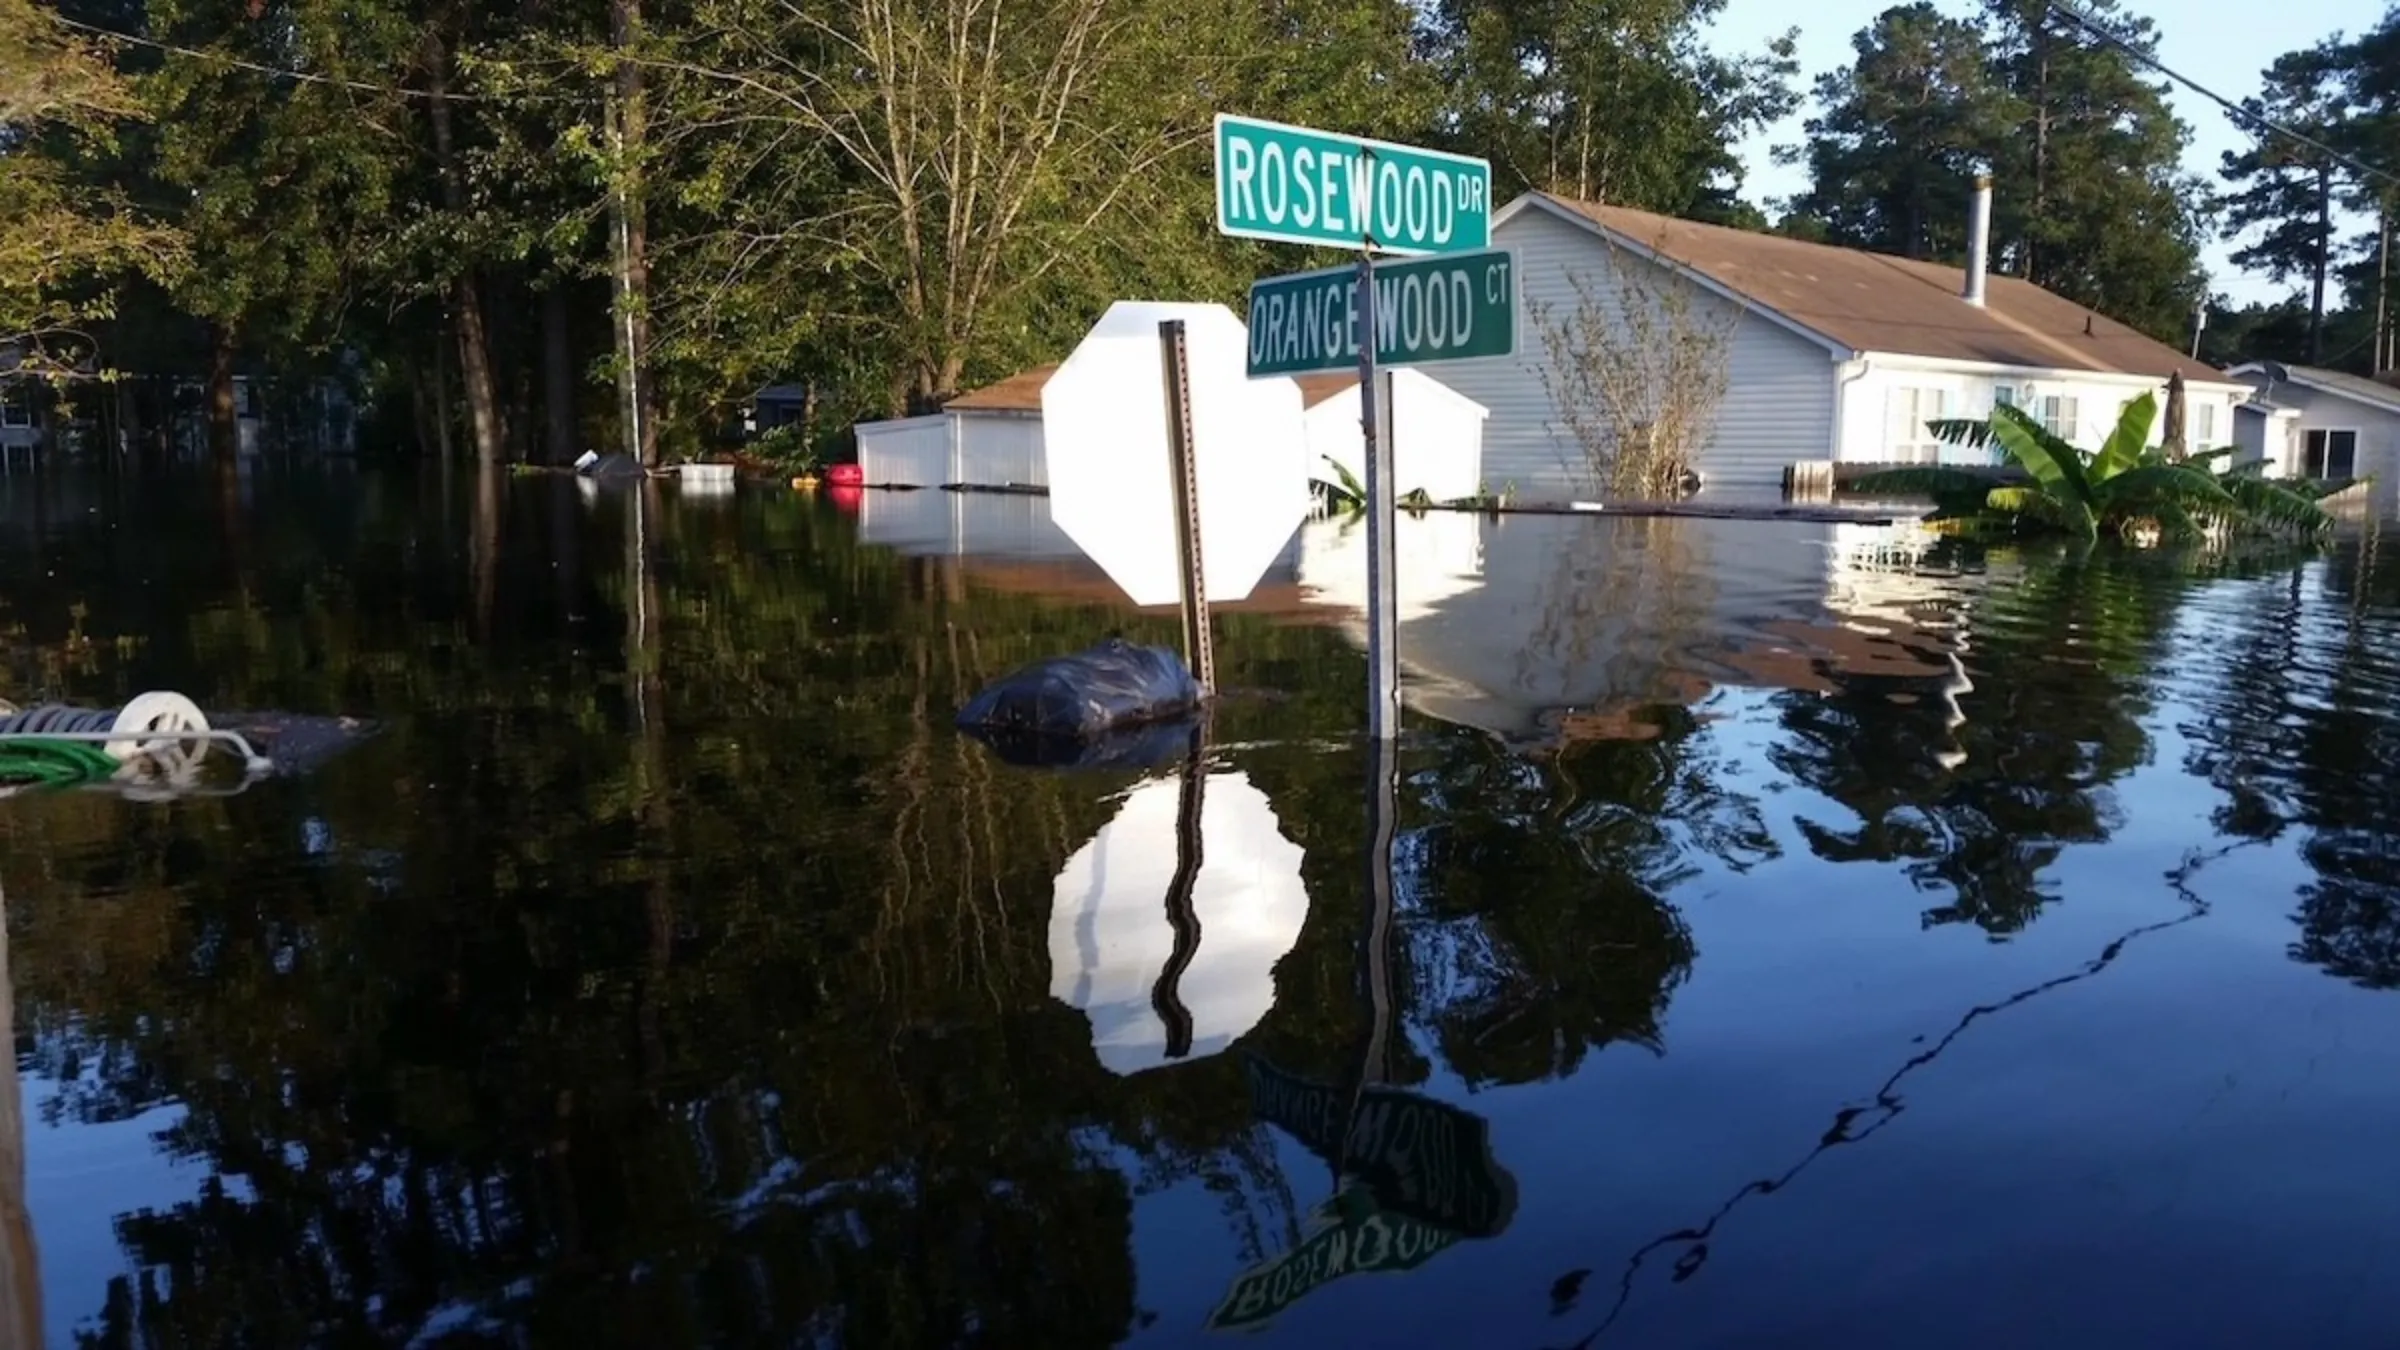 The intersection of Rosewood Drive and Orangewood Court is pictured amid flooding in Socastee, South Carolina, USA in 2018. Thomson Reuters Foundation/Terri Straka